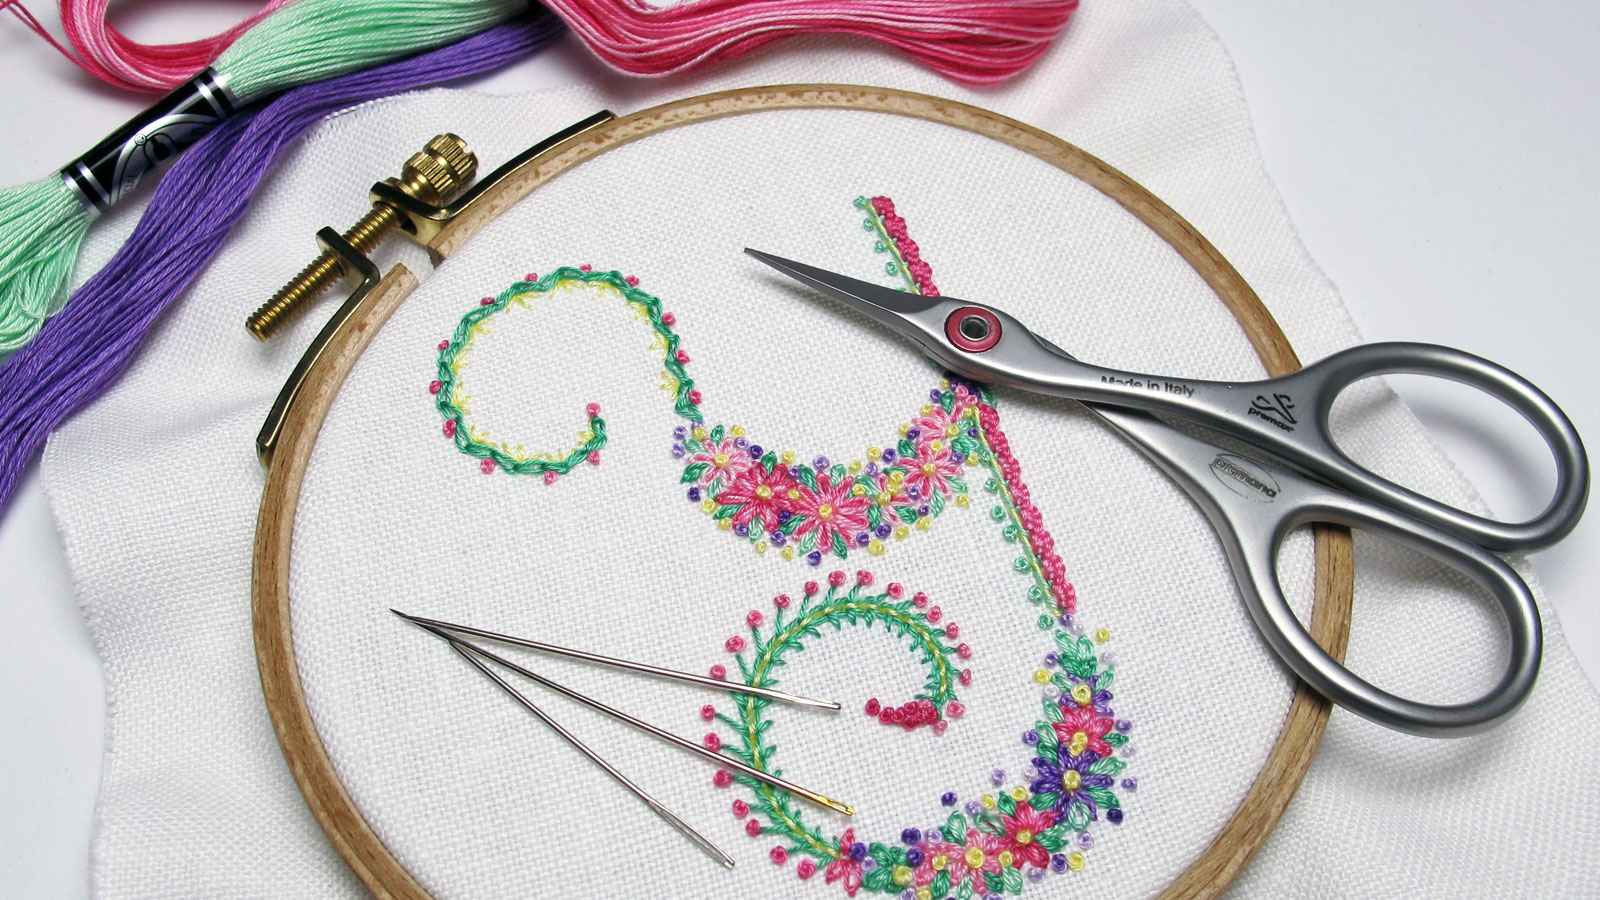 Hardanger Embroidery Patterns Online Free Needlenthread Tips Tricks And Great Resources For Hand Embroidery